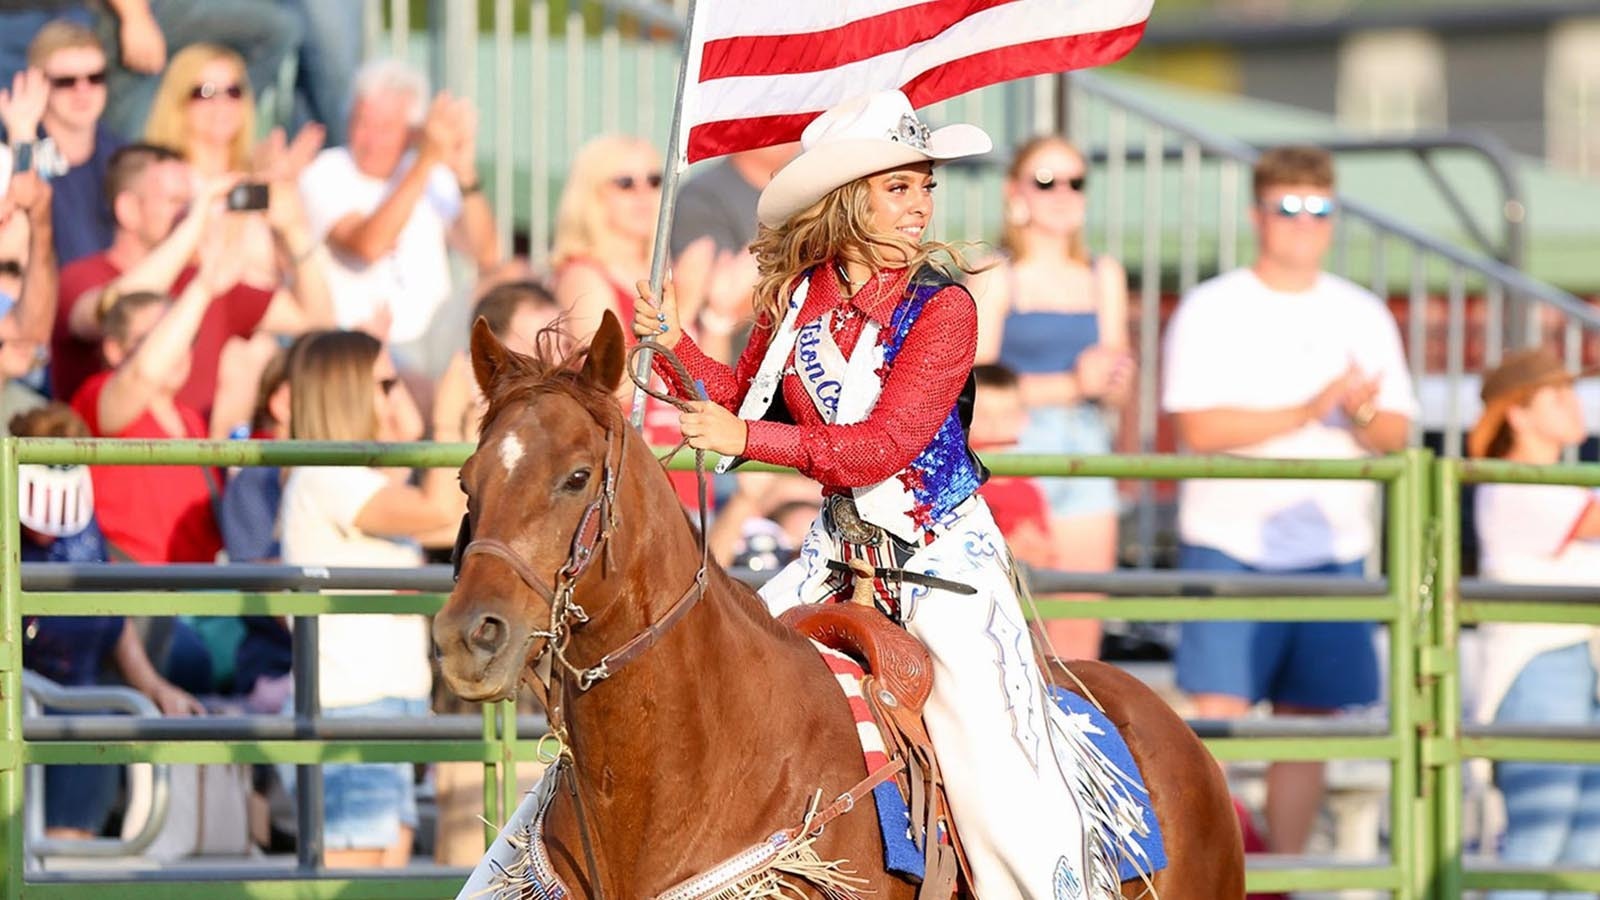 Rodeo Rodeo Royalty involves queens and princesses who bear flags and compete in events JH Rodeo 6 22 24